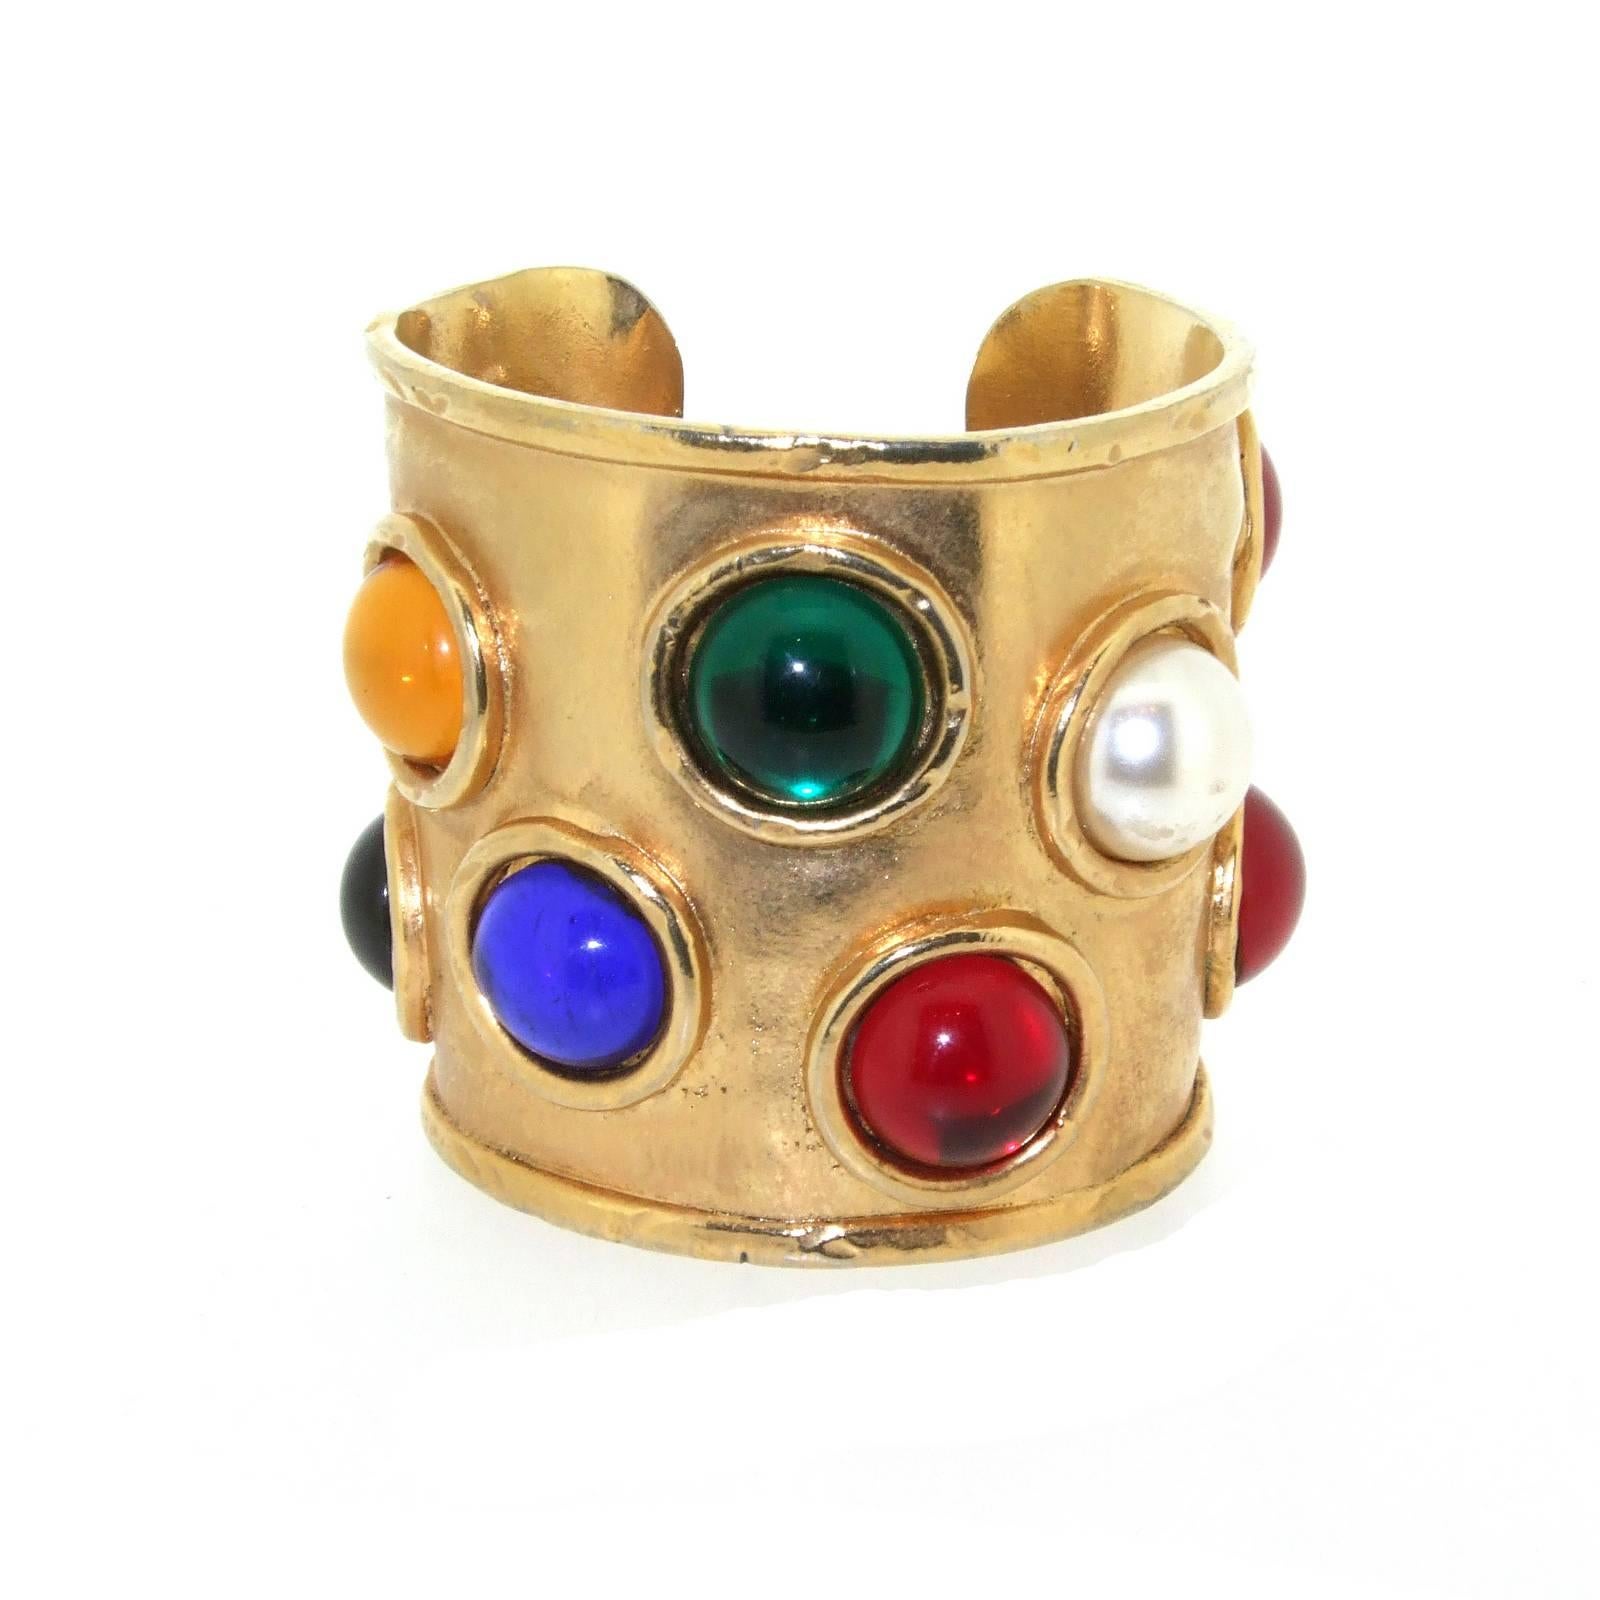 A vintage cuff bracelet by Edouard Rambaud Paris. Made from gold plated brass, time worn and set with glass multi-coloured and pearl glass stones. 

It measures 6cm high by 6.1cm wide, 7 inches around the wrist. The dark shadow in the photo is